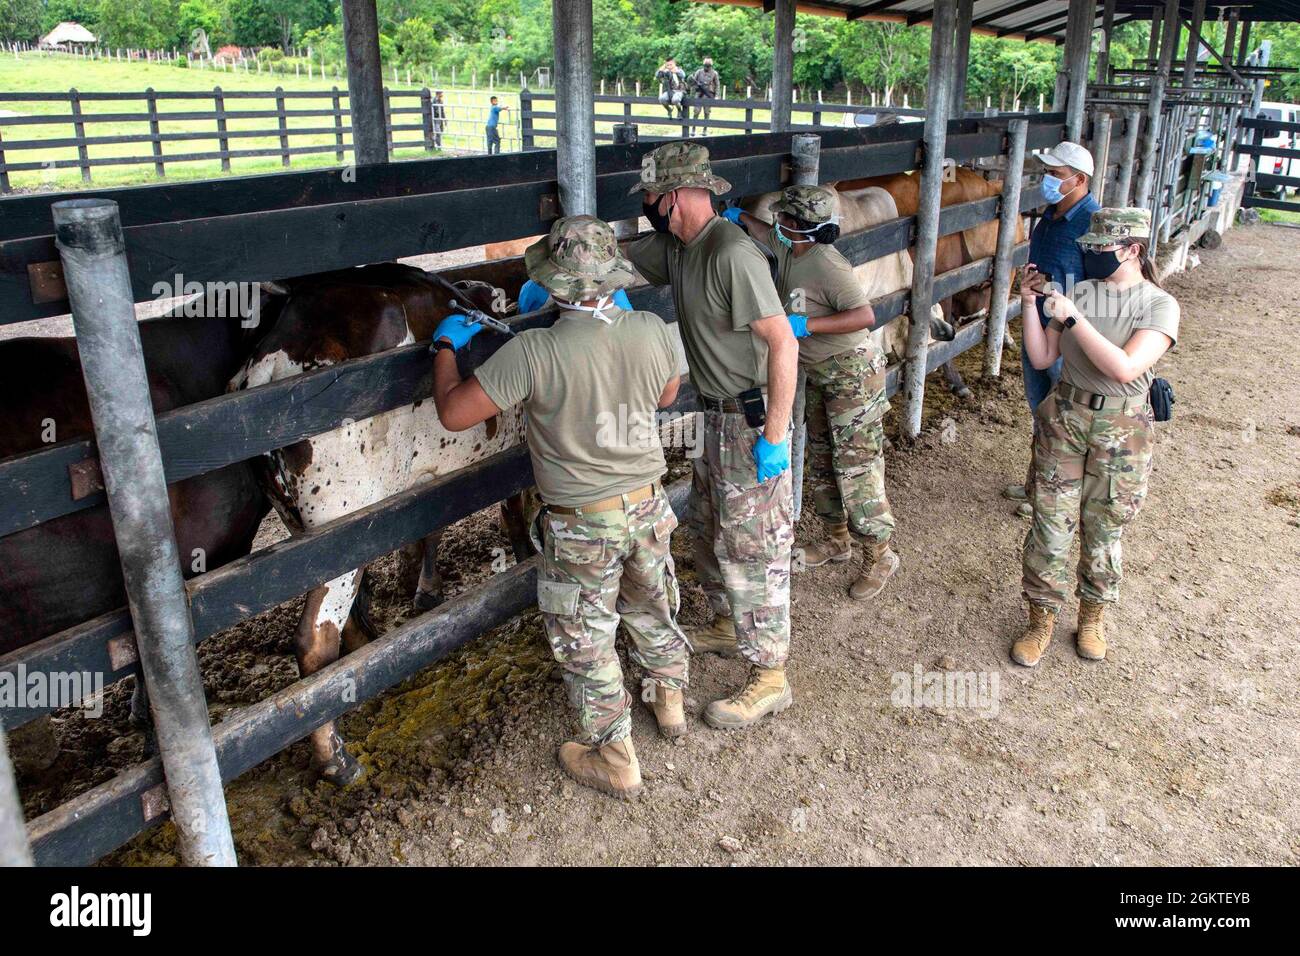 U.S. Army veterinarians, Capt. Shanell Thomas and Maj. Matthew Conlan (center) and U.S. Army Staff Sgt. Rene Aventure (back towards camera), a field veterinary service technician, vaccinate cattle while U.S. Army Spc. Sonya Walker, a field veterinary specialist, all with the 109th Medical Detachment Veterinary Services out of Garden Grove, Calif., takes photos as local veterinarian Set Samayoa observes in Melchor De Mencos, Guatemala, June 29, 2021. Resolute Sentinel 21 is an exercise to train U.S. and partner nation military engineers, veterinary personnel and medical professionals for humani Stock Photo